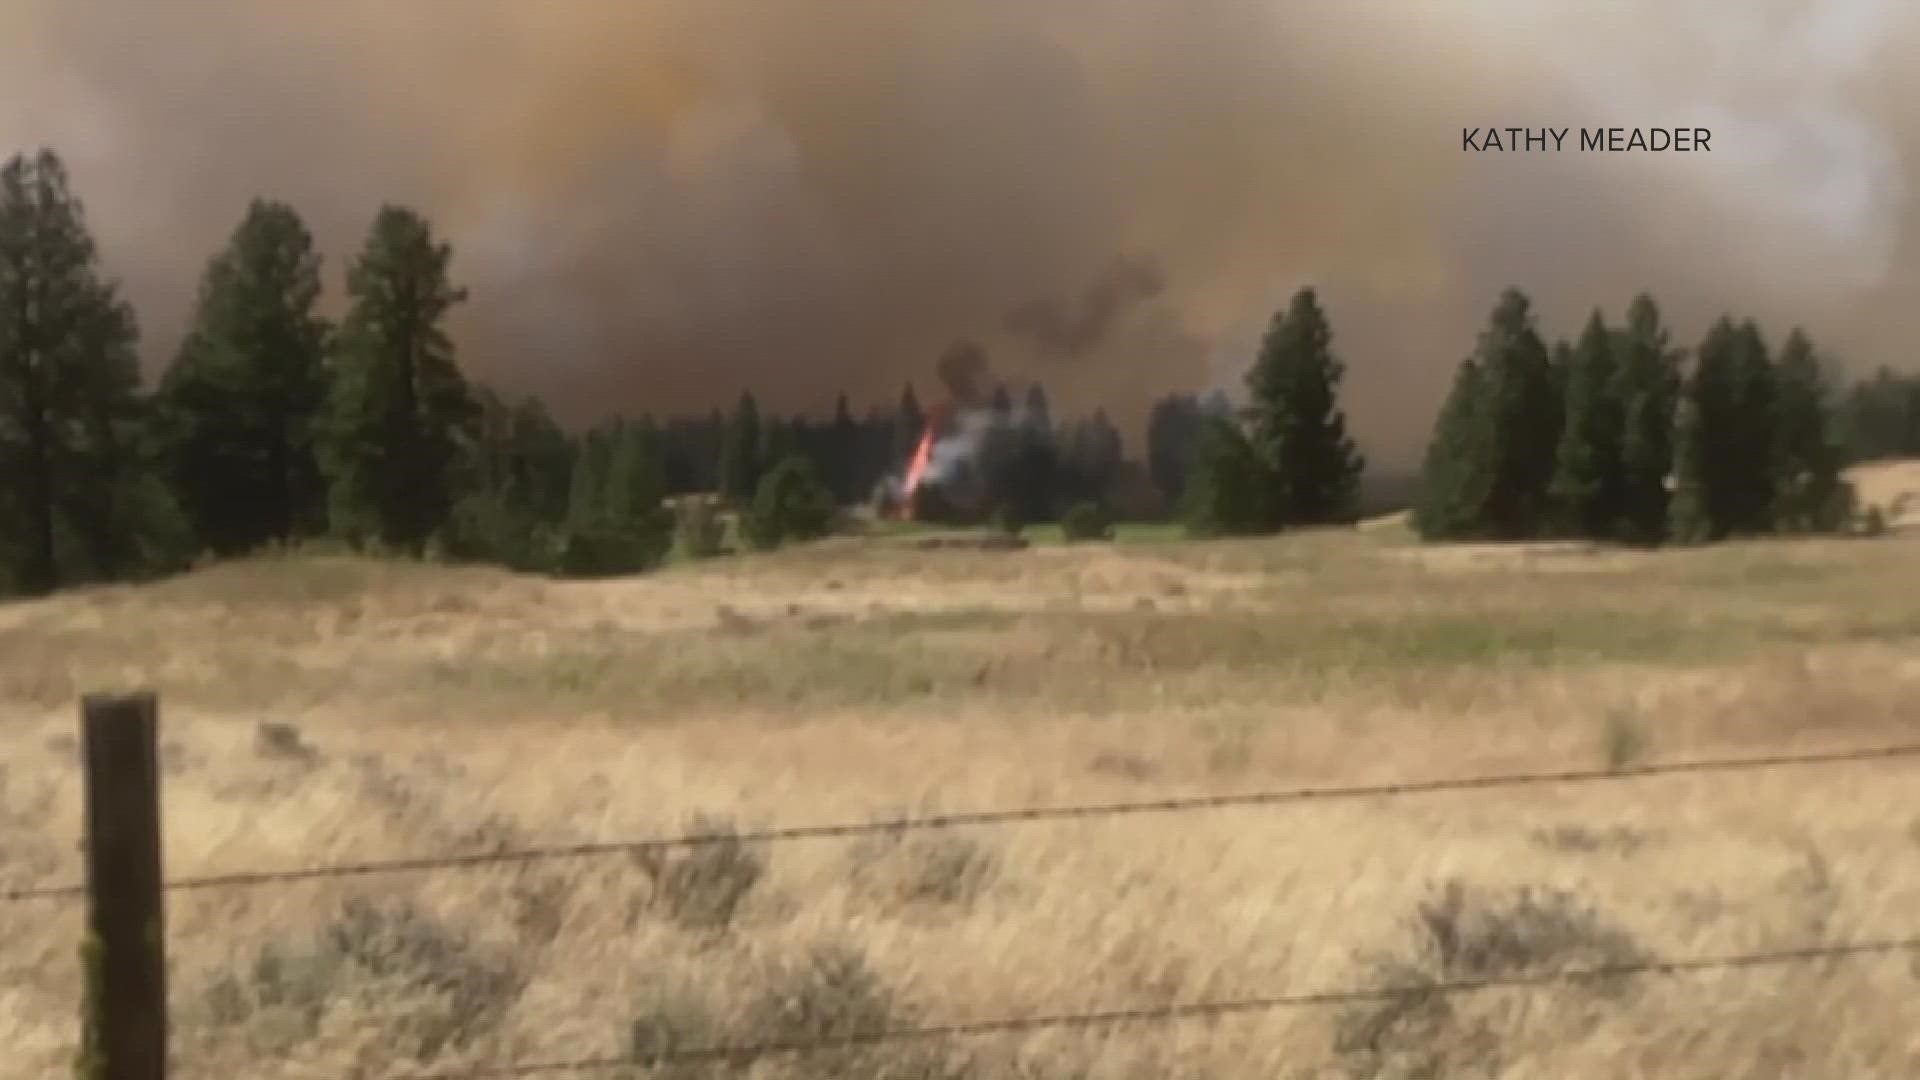 Before fire crews got to the fire near Williams Lake, Kathy Meader was there to capture its early stages.